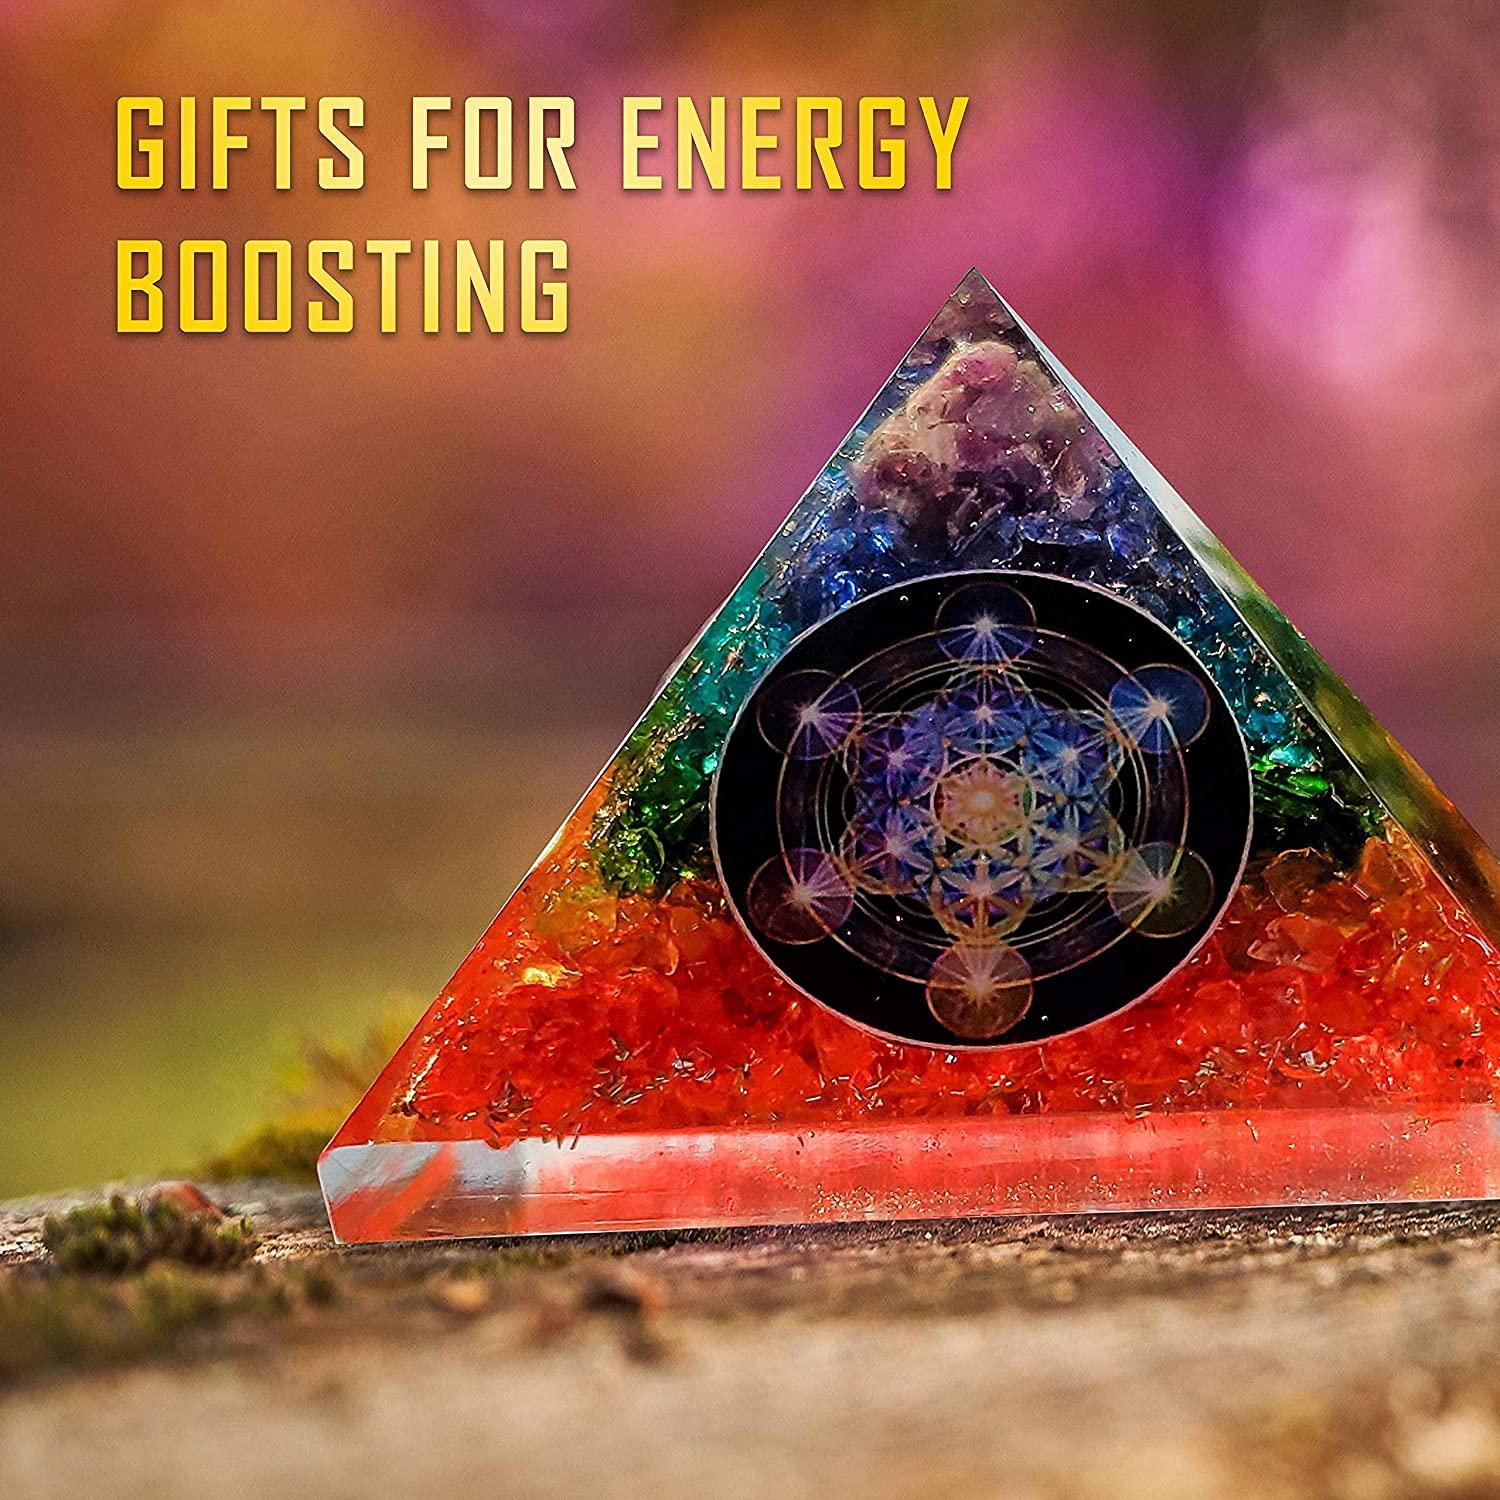 26 Positive Energy Gift Ideas for Spiritual People